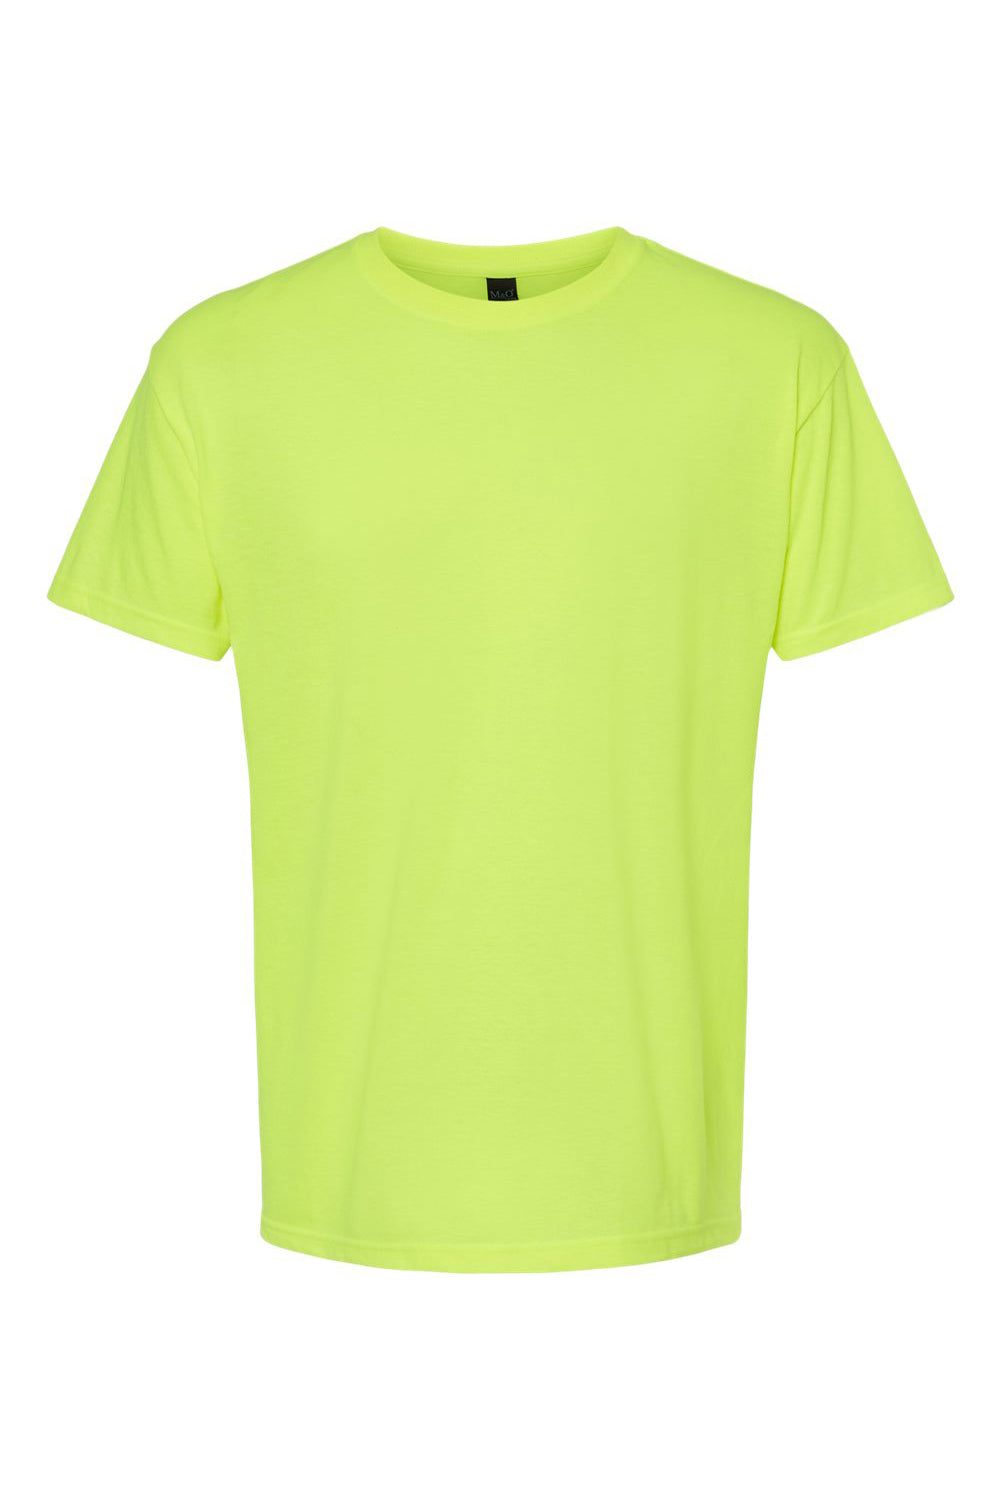 M&O 4800 Mens Gold Soft Touch Short Sleeve Crewneck T-Shirt Safety Green Flat Front